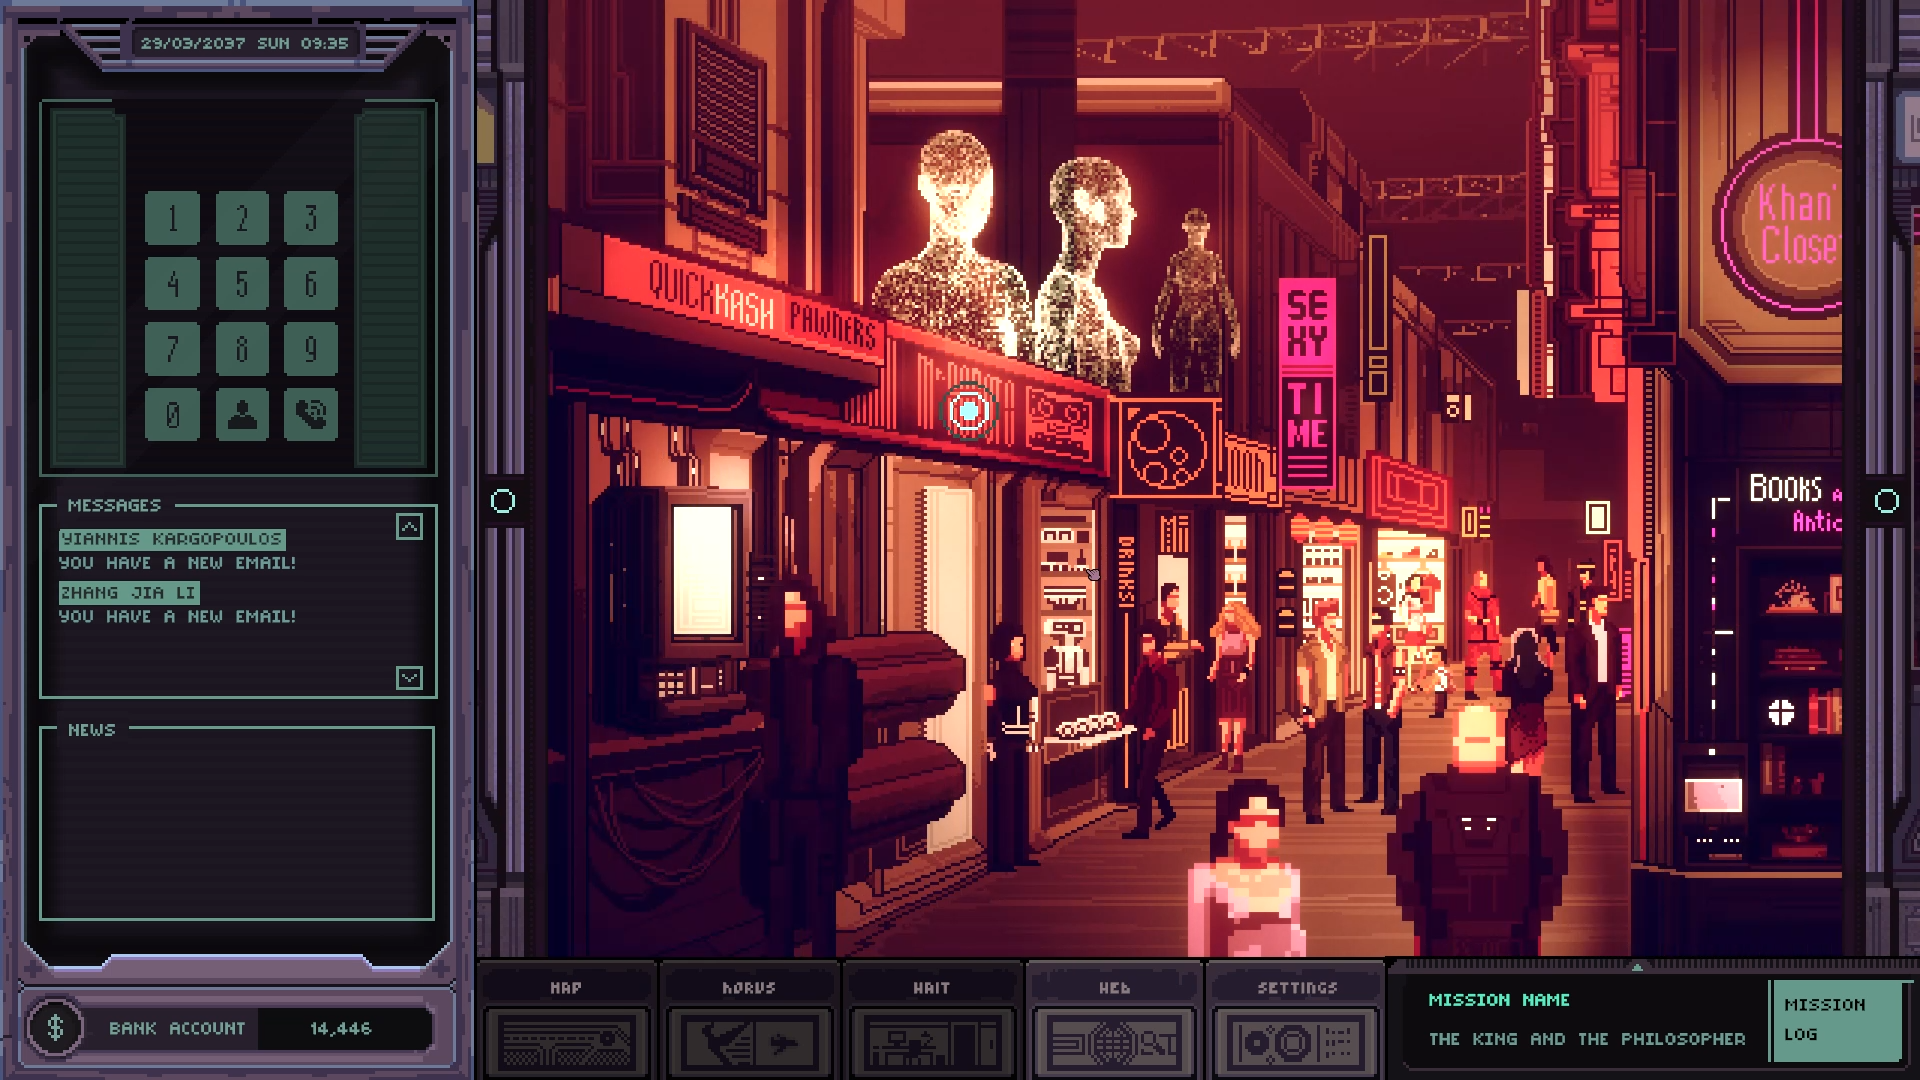 Point-and-click game Chinatown Detective Agency is set in cyberpunk future  Singapore, Digital News - AsiaOne